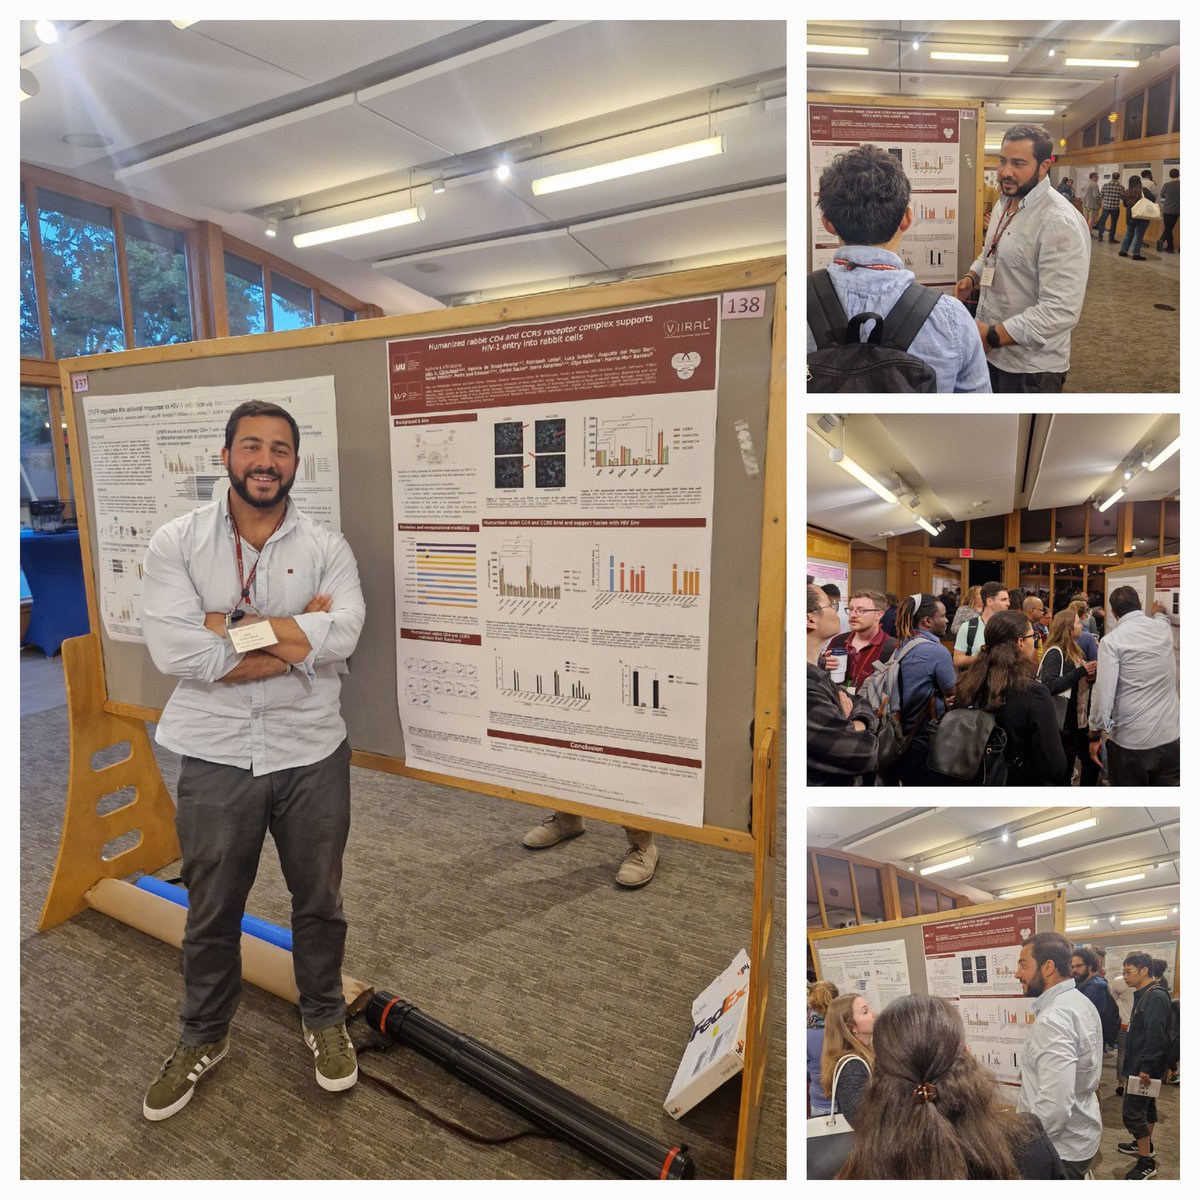 Great poster session by @joaocreal17 last night #cshlretro. We would like to thank @DocMvPI1 for the travel scholarship! #proudPI #lovevirology